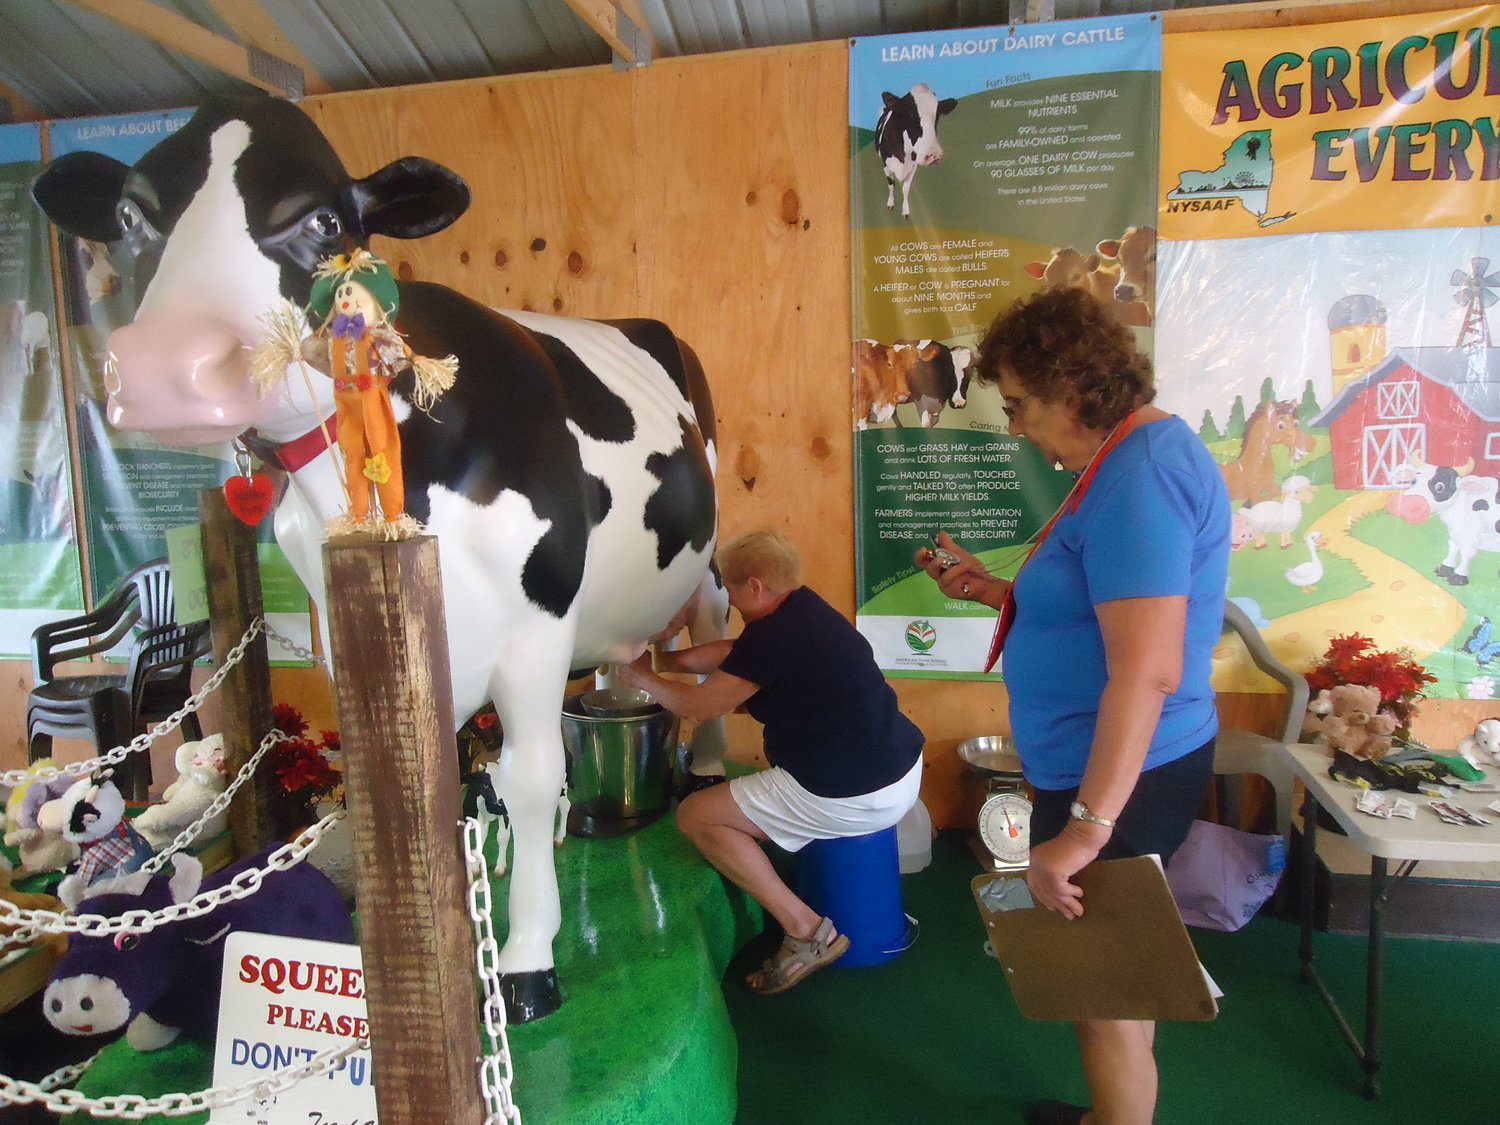 Fairgoers can get an idea of what it’s like to milk a cow by hand - and how quickly they can manage the task - at the Herkimer County Fair. They can be assured that this is one cow that will stand still, even for the most inexperienced milker.